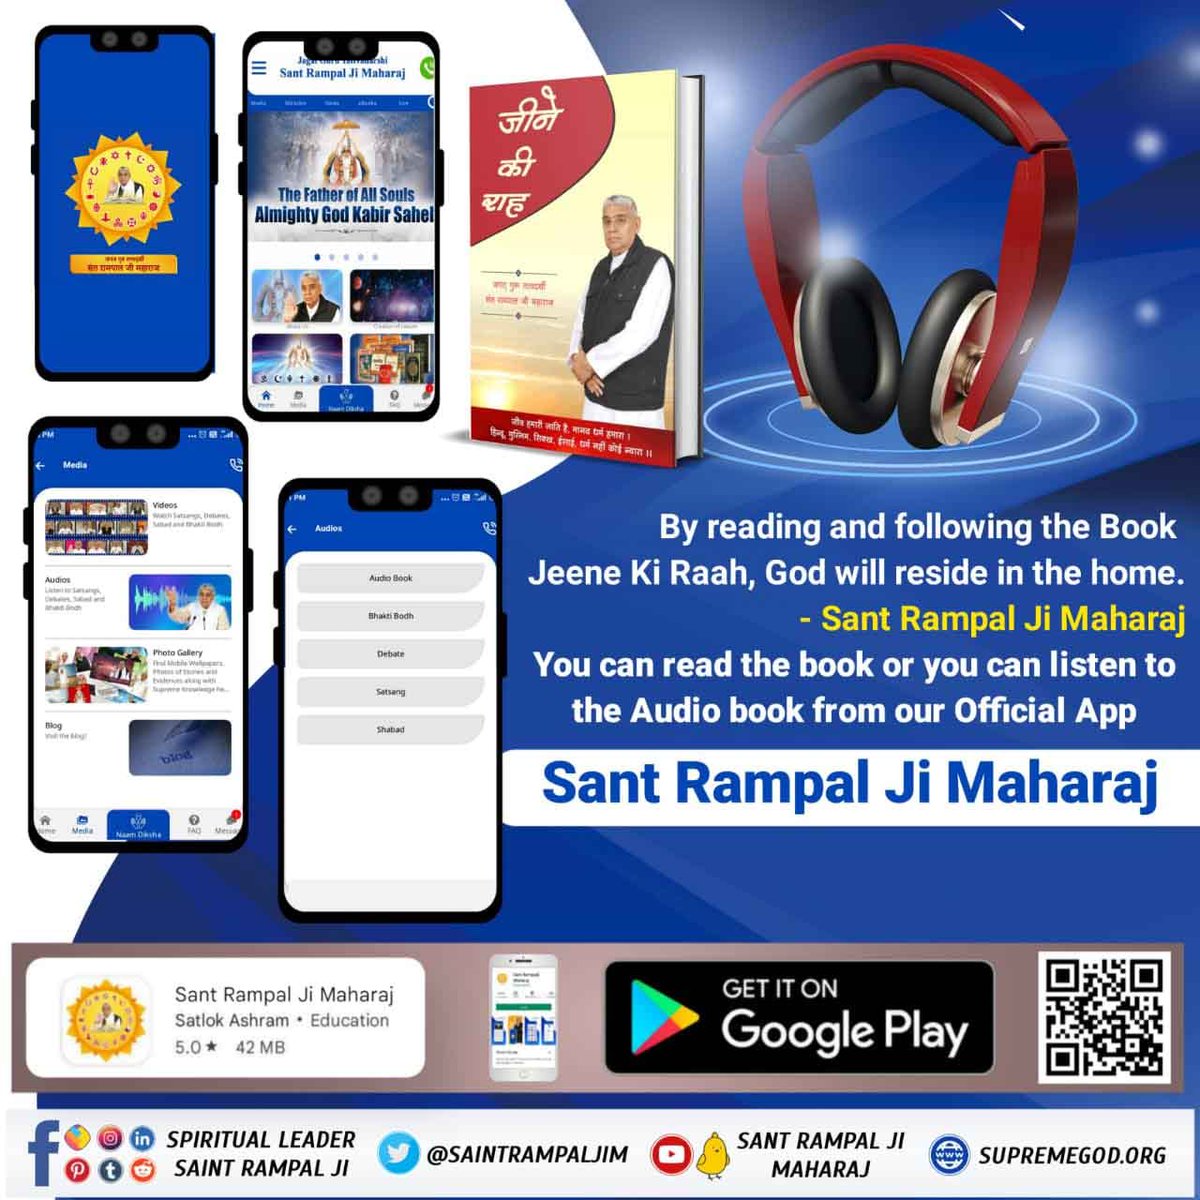 #GodMorningThursday
A DEVOTEE, WHO ON READING THE BOOK 'JEENE KI RAH' WILL TAKE INITIATION AND WORSHIP ACCORDING TO THE RULES WILL NOT HAVE AN UNTIMELY DEATH.
📲To know more, Download our Official App Sant Rampal Ji Maharaj